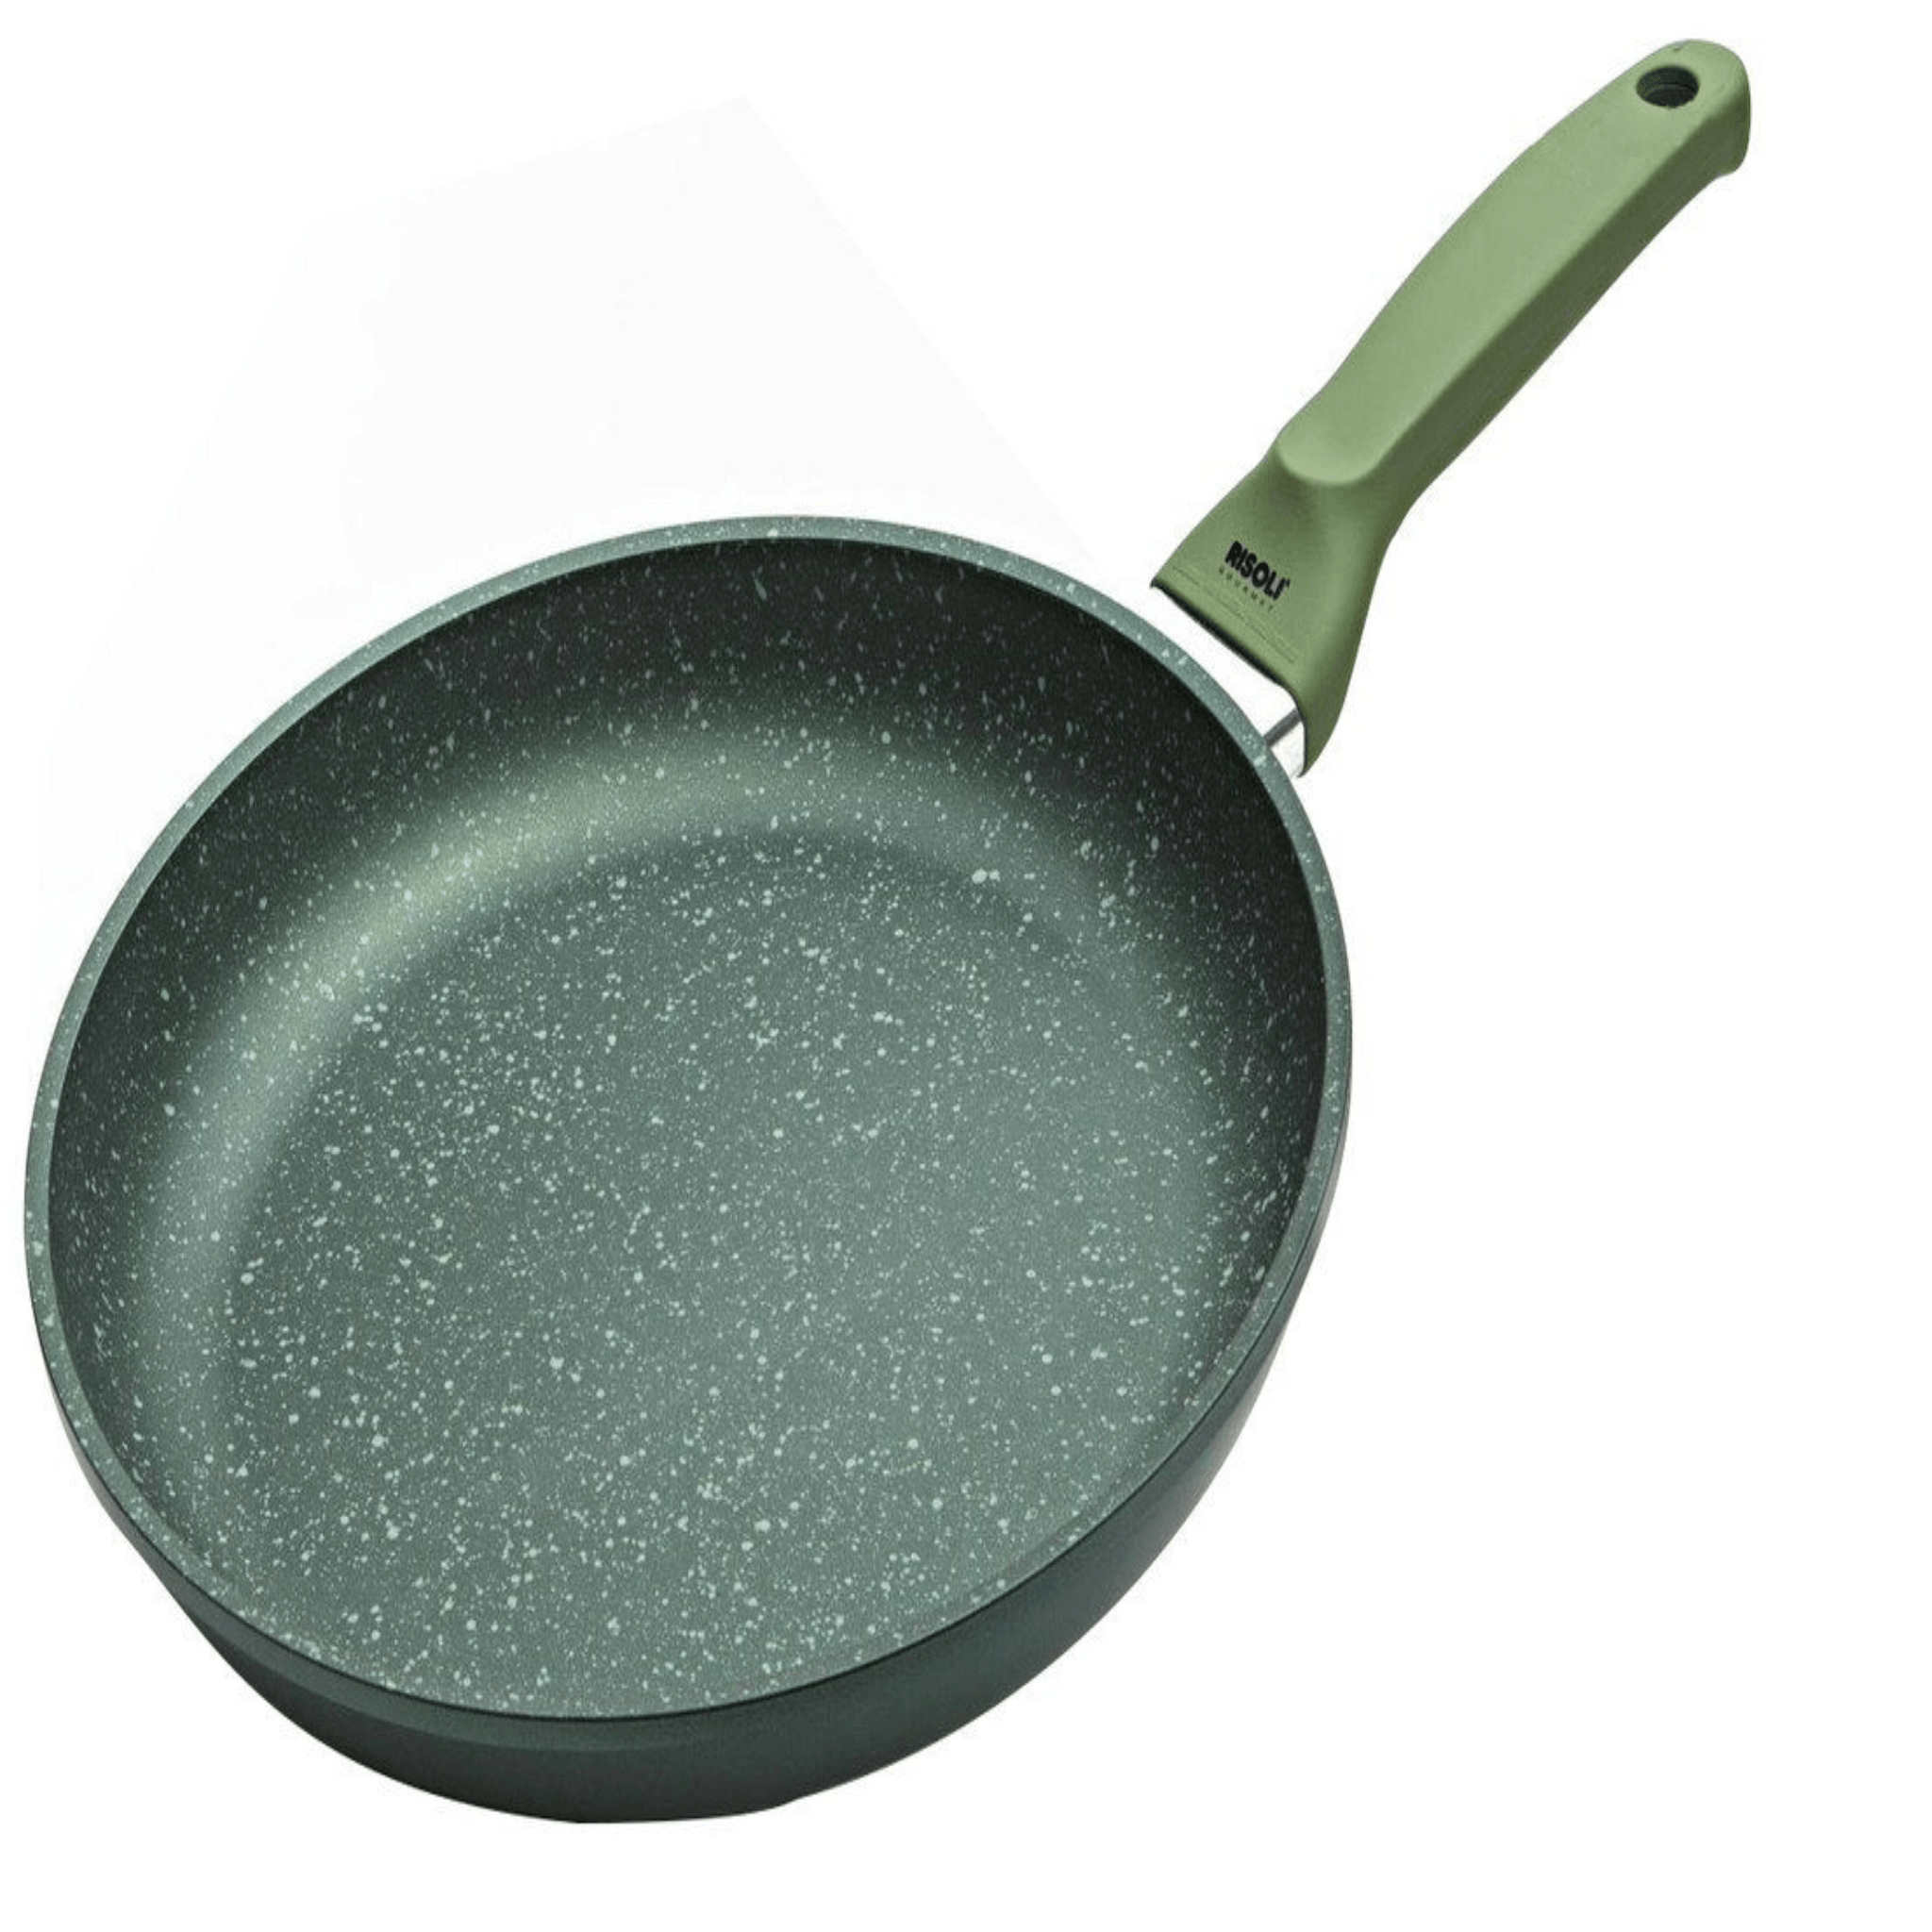 Risoli - Dr.Green Frypan with Handle - Green - Die Cast Aluminum - 24cm - 44000322